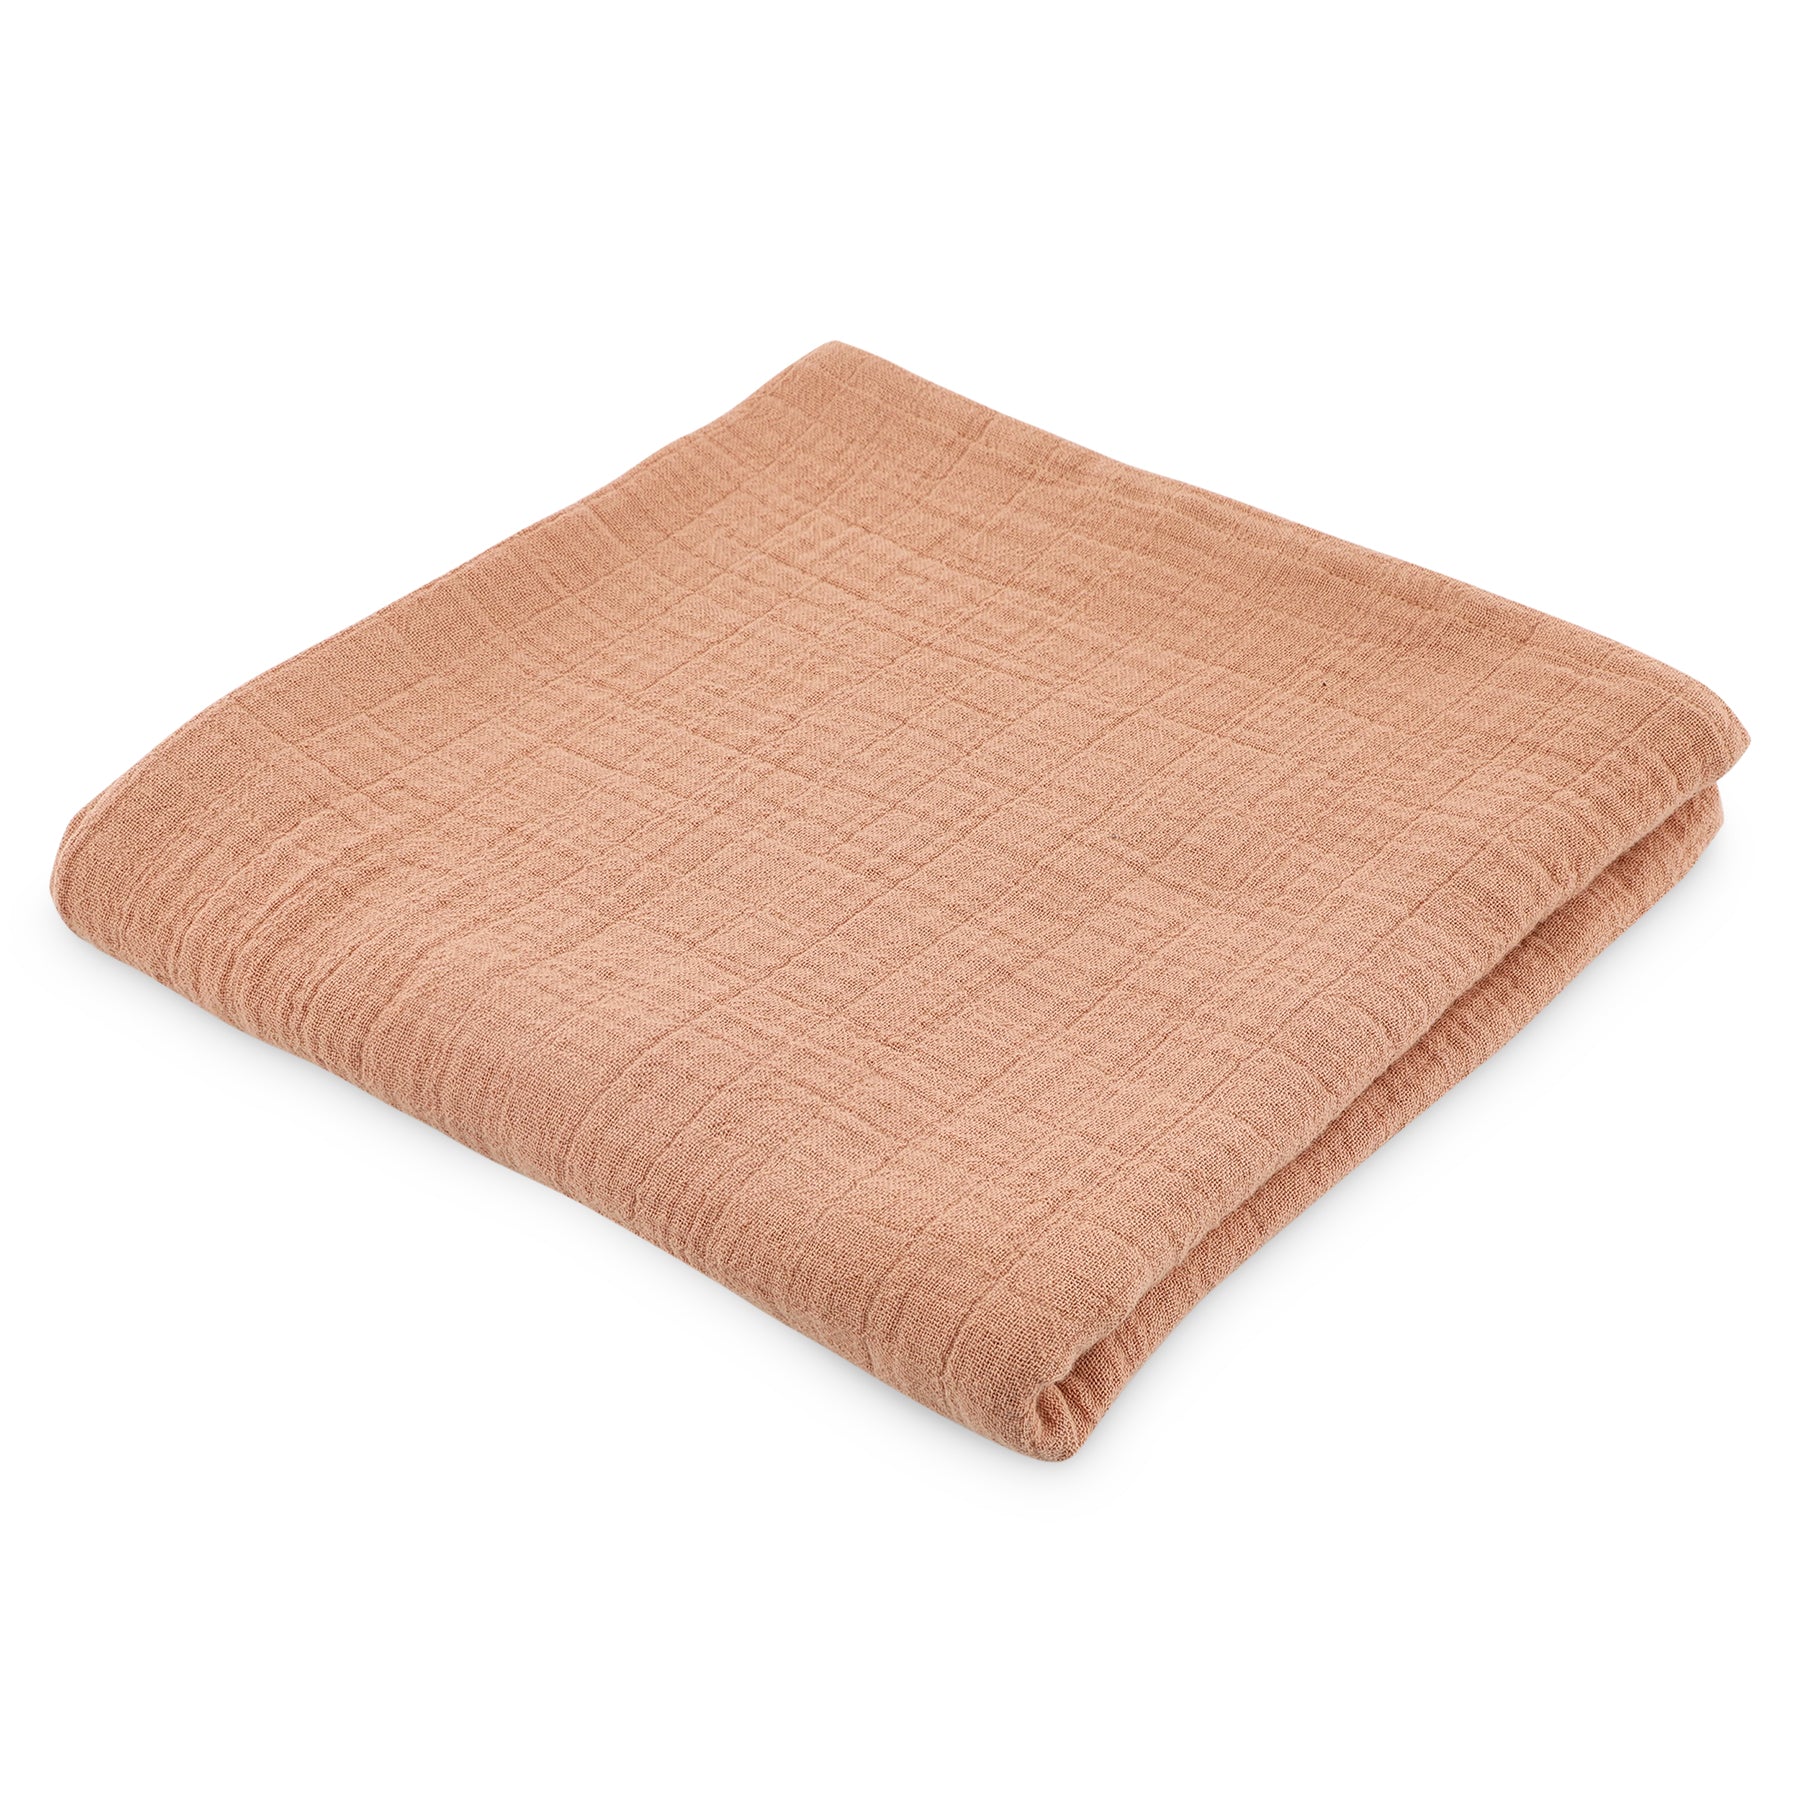 Large muslin square organic cotton coral